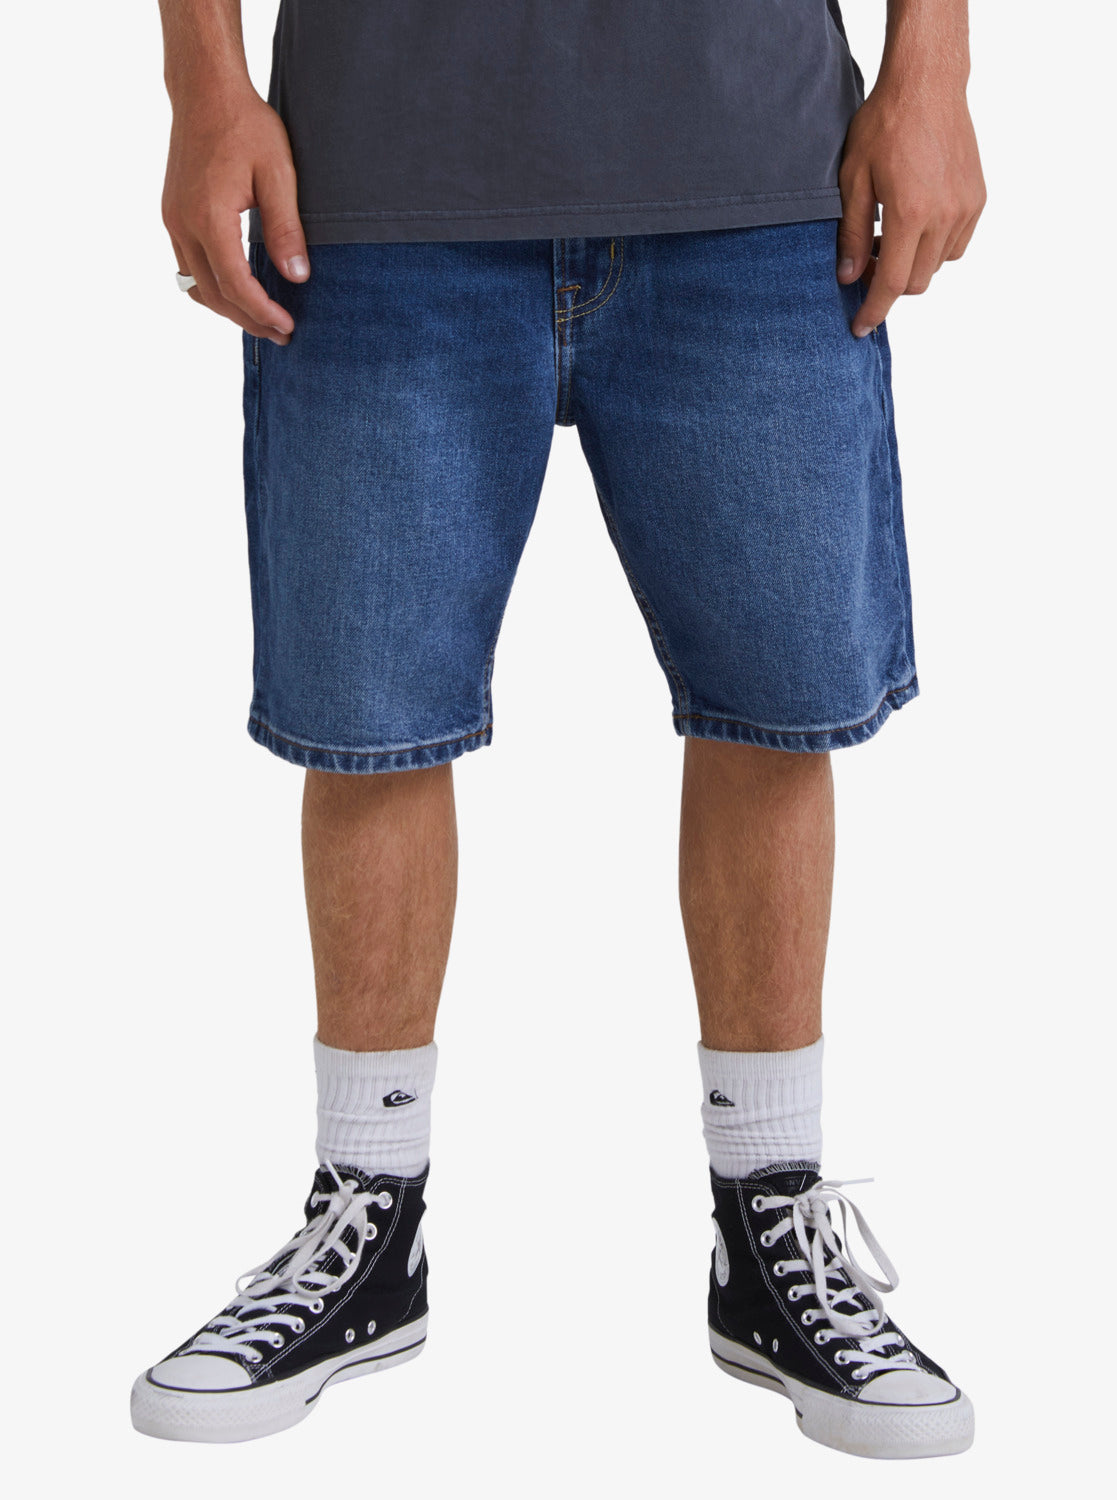 Lower part of man wearing the Quiksilver Aqua Cult 20" Aged Denim Shorts in blue